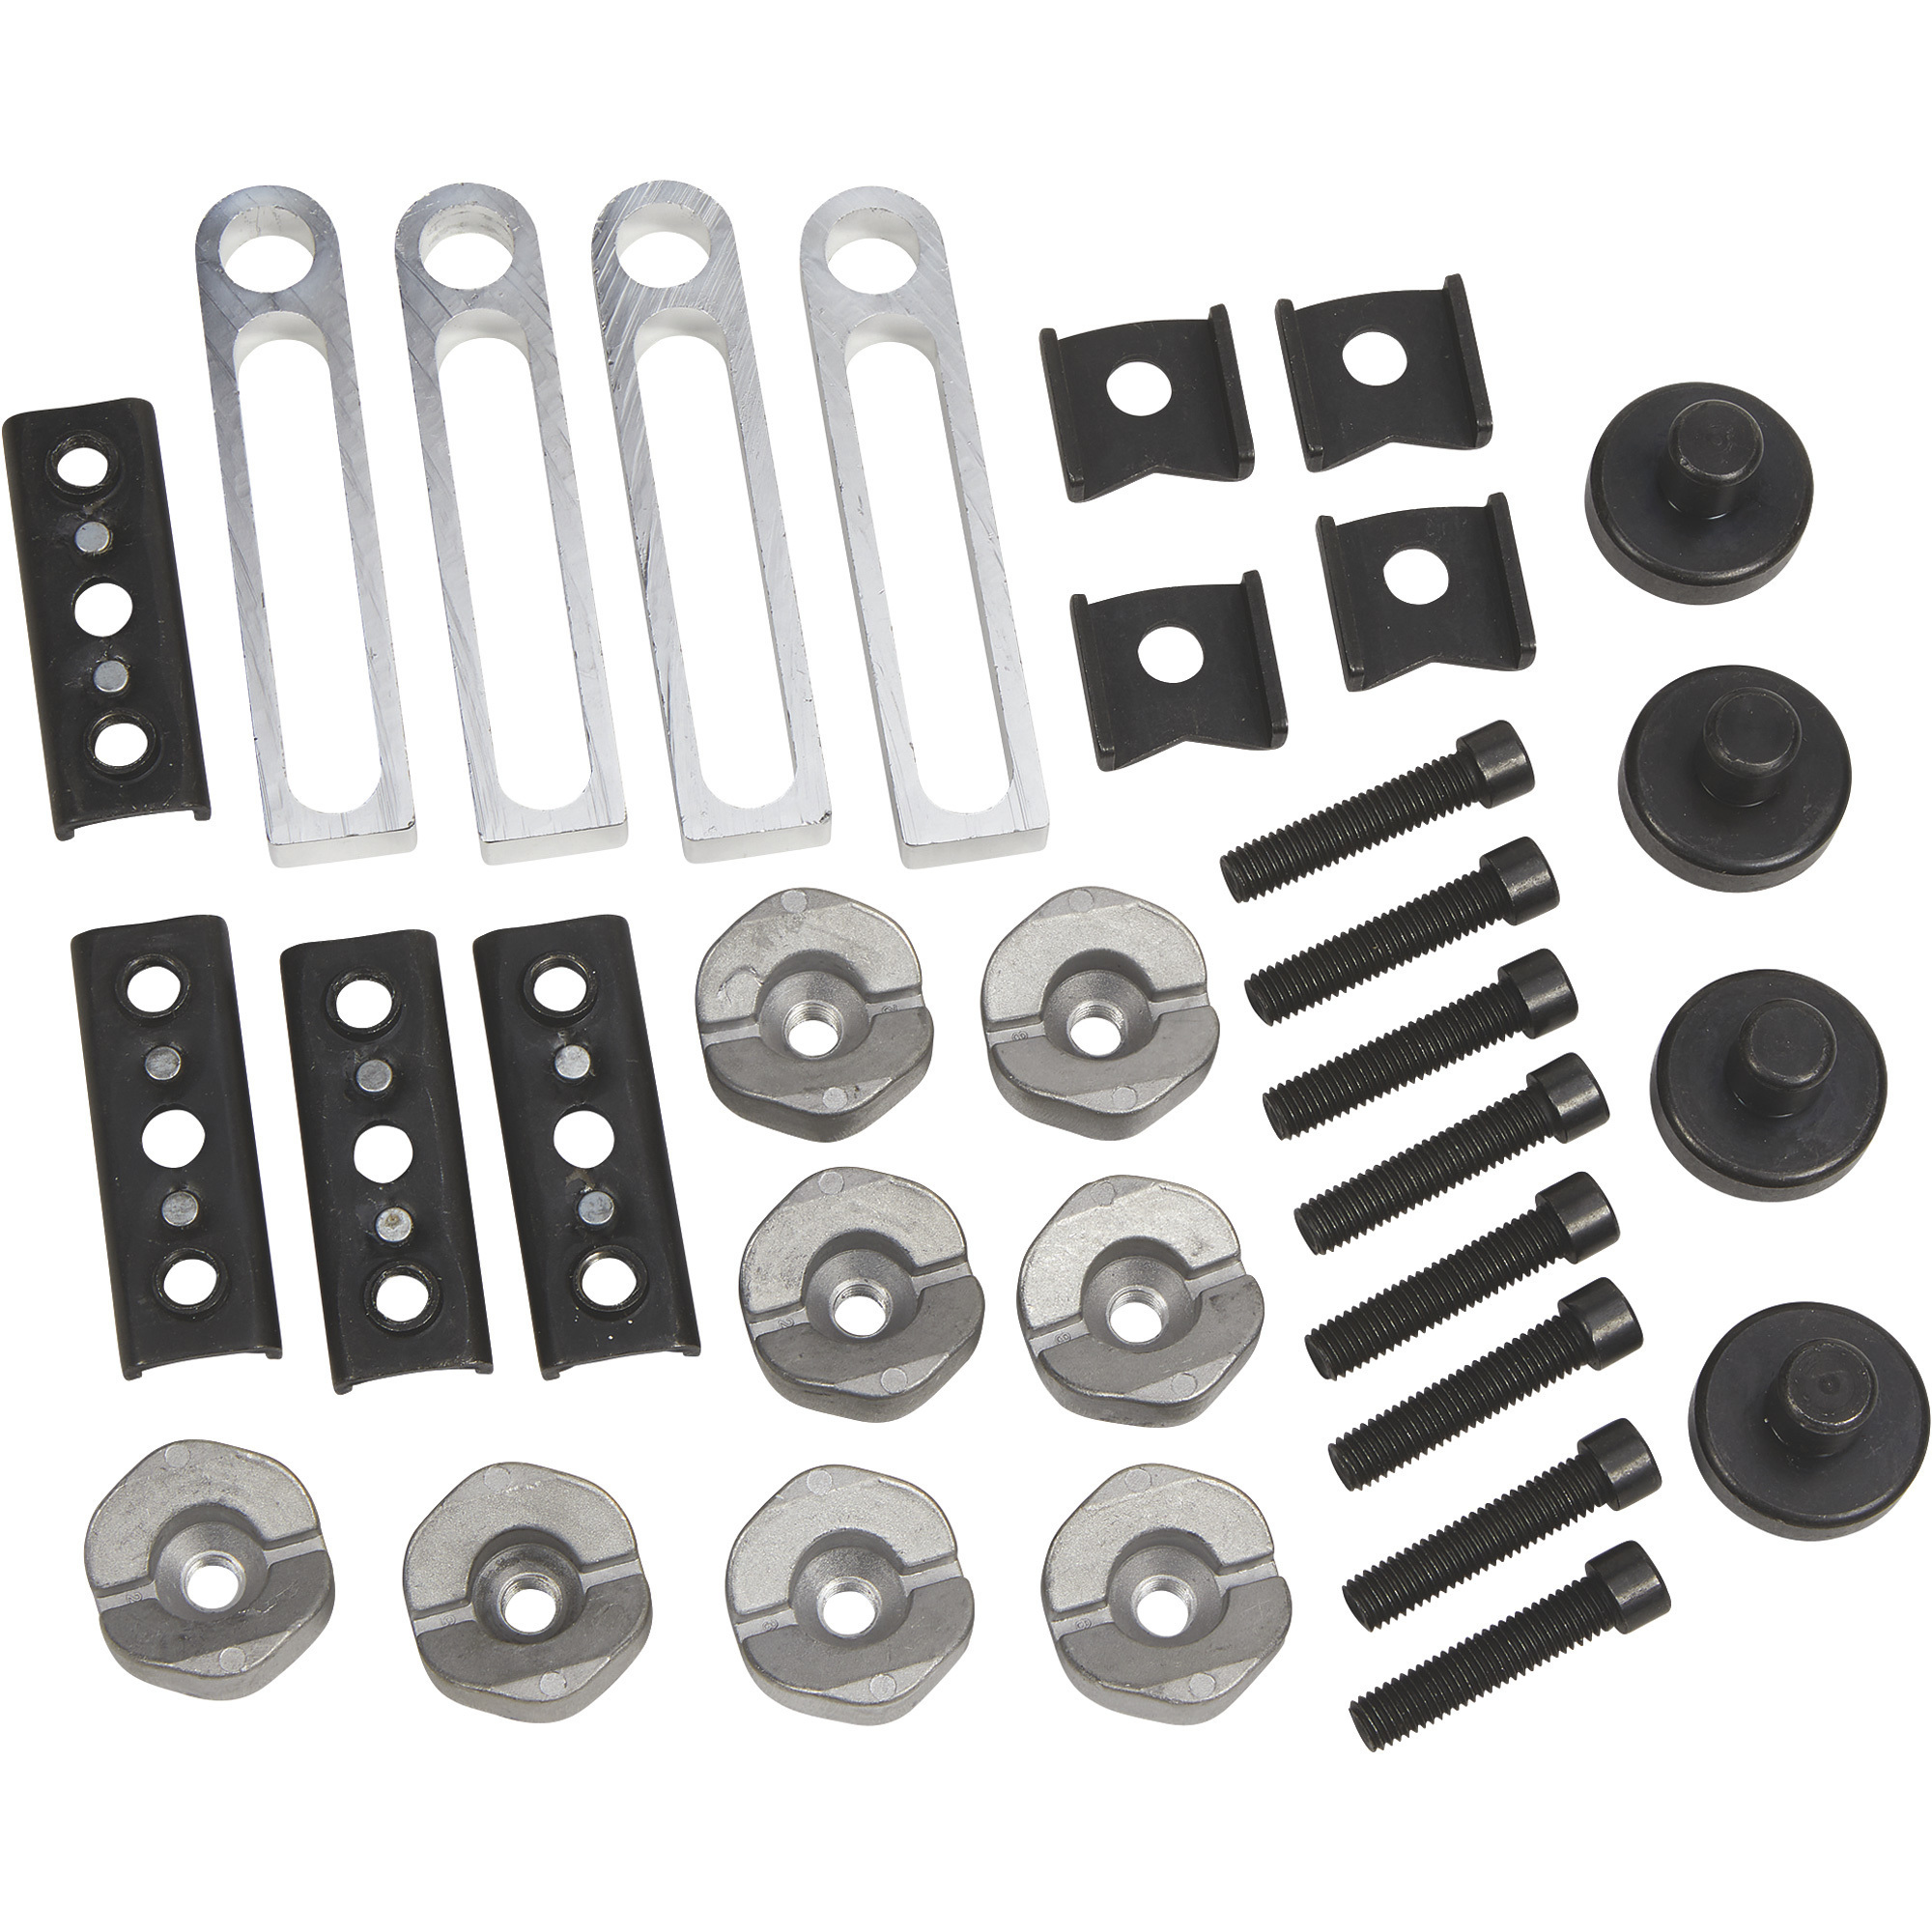 Klutch Welding Table Workhold Accessory Base Kit, 32-Pcs.